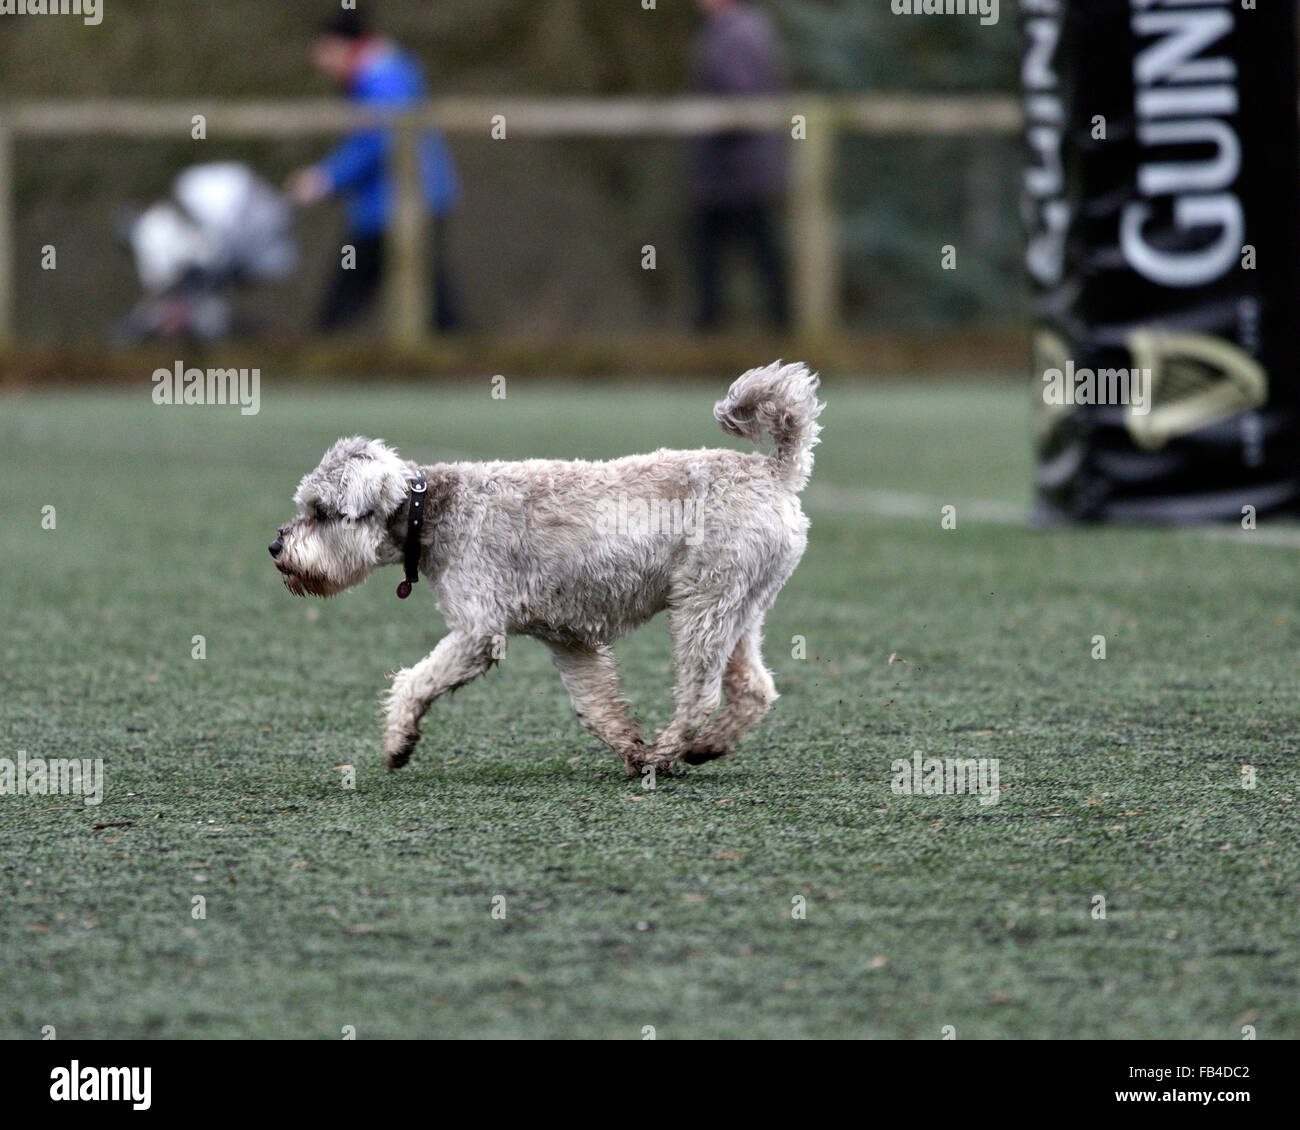 Burnage  9th January 2016 A moment of levity, as a dog walks acoss the pitch and stops the game in which Burnage Rugby Club were attempting to move from bottom place in the league but were heavily defeated by Ilkley, who were third bottom. Credit:  John Fryer/Alamy Live News Stock Photo